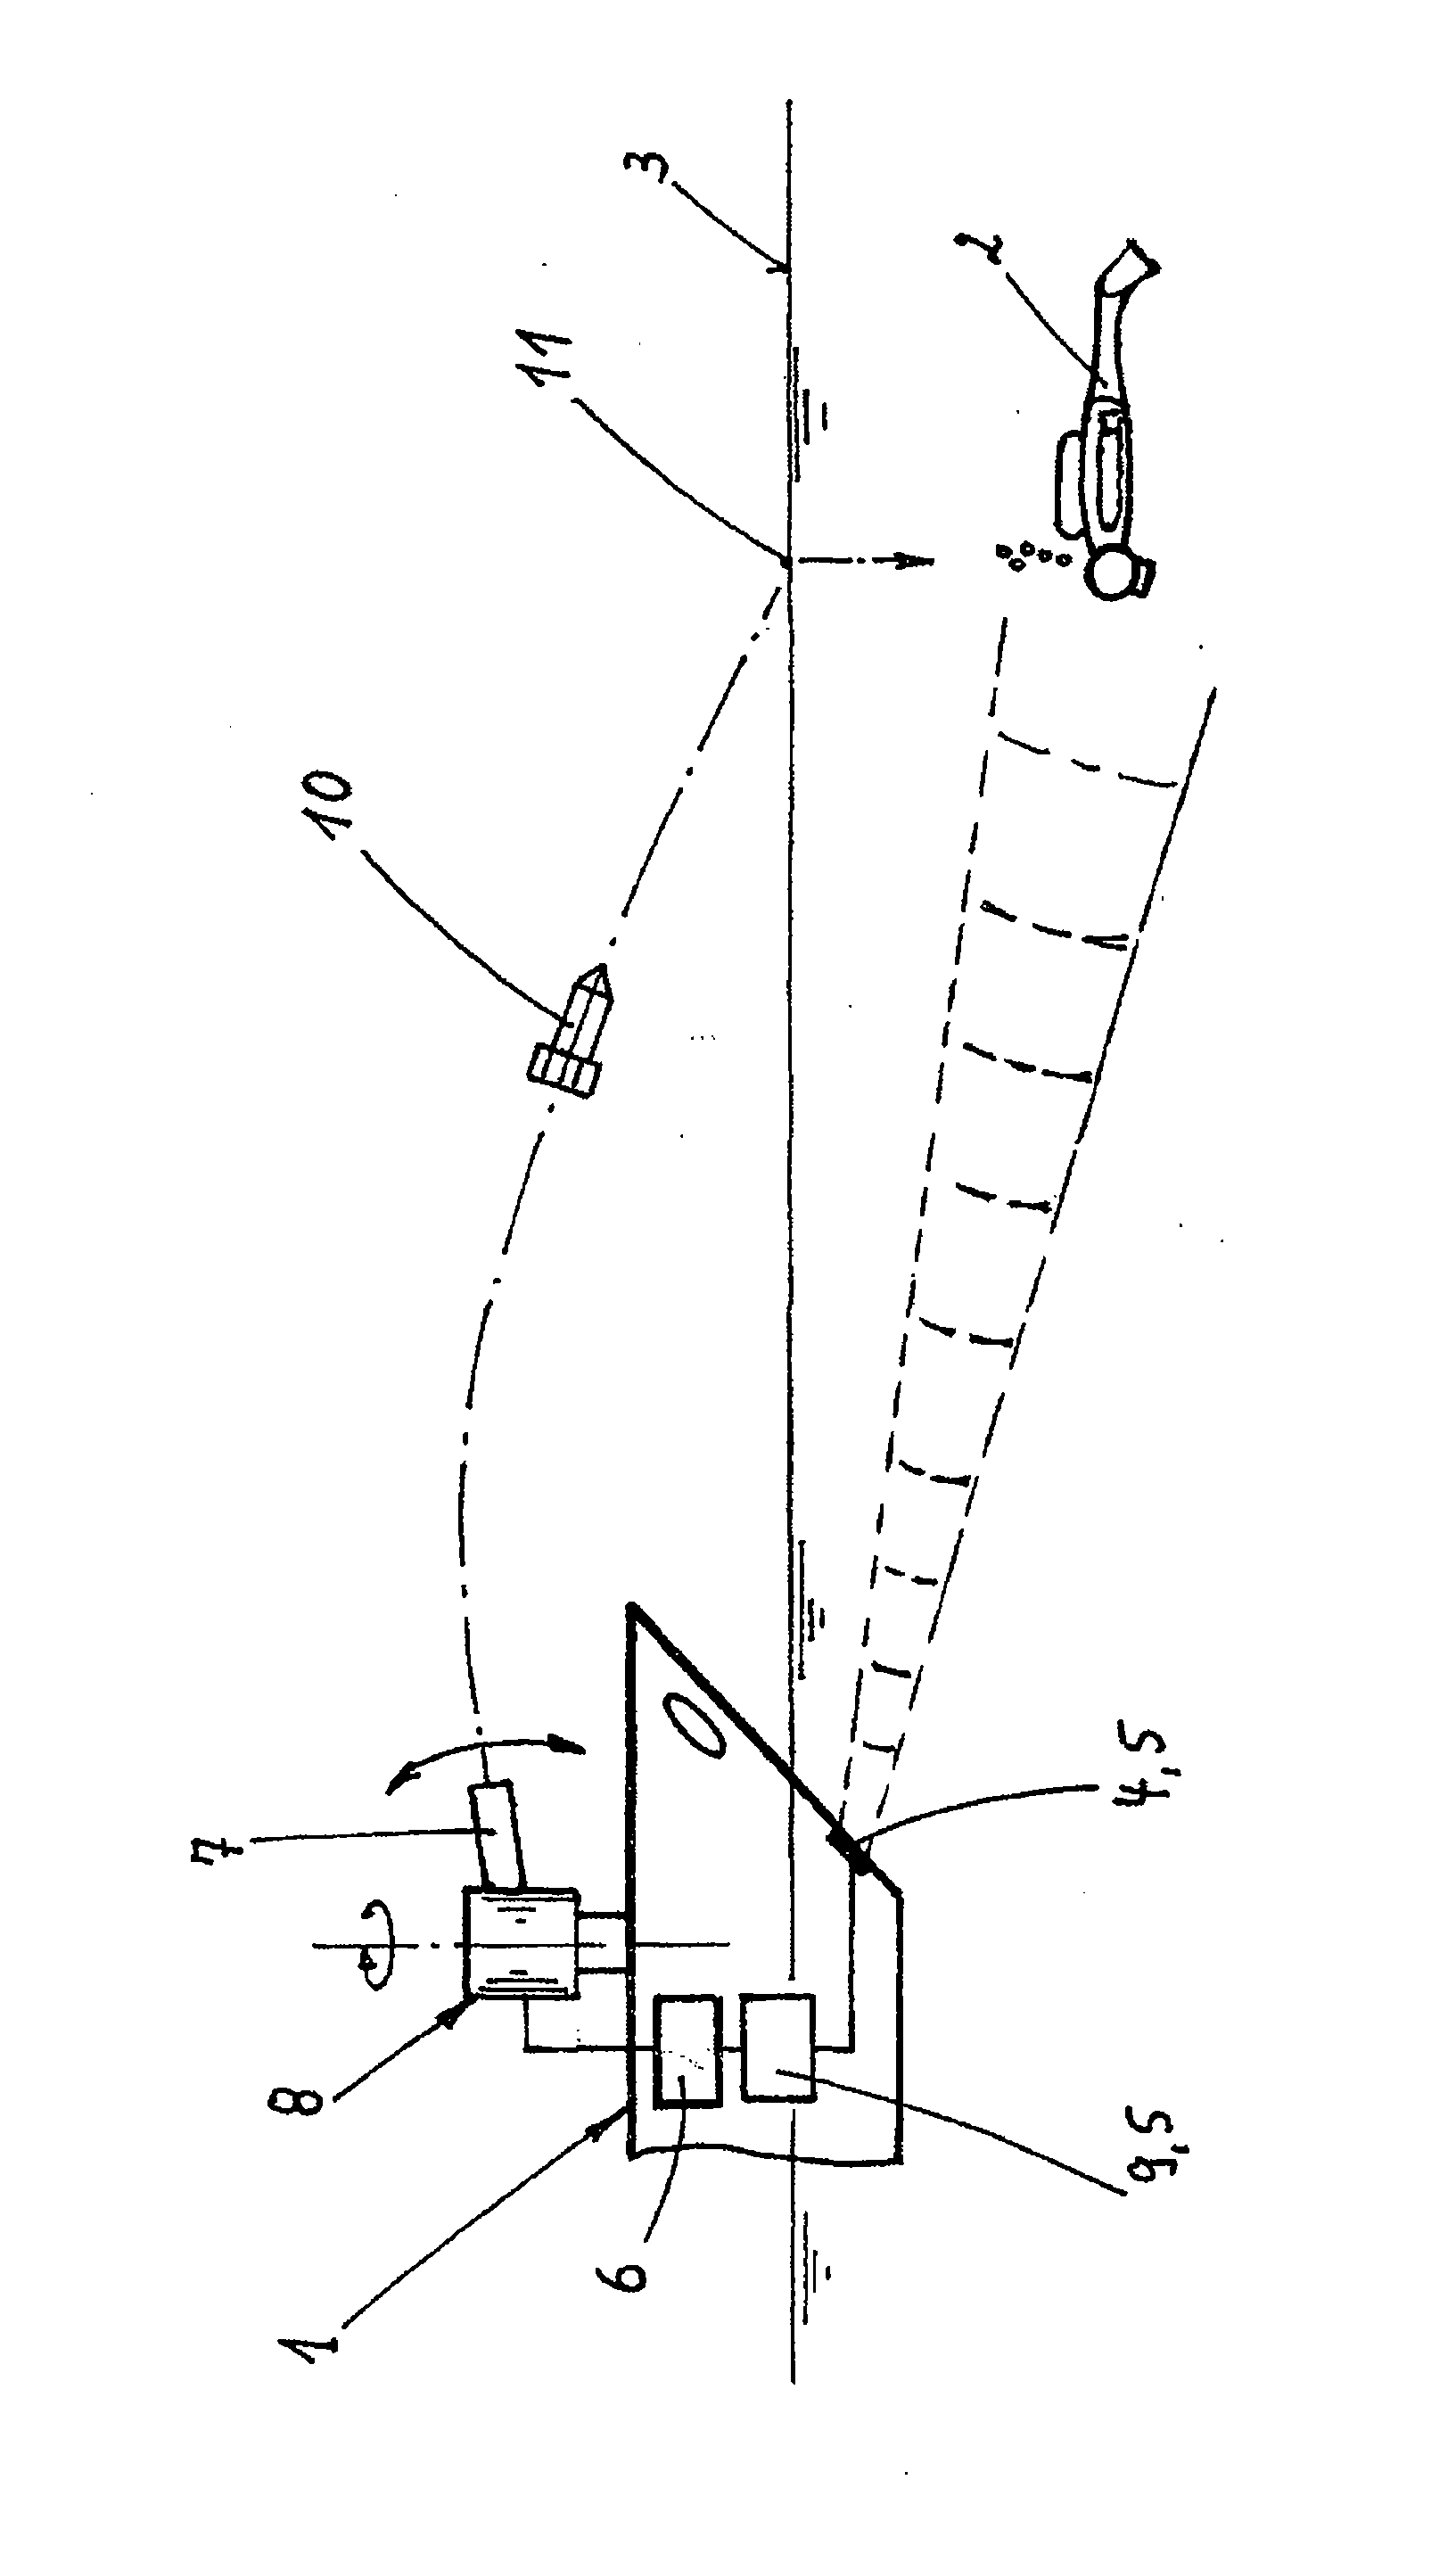 Device and method for warding off objects approaching a ship under or on water